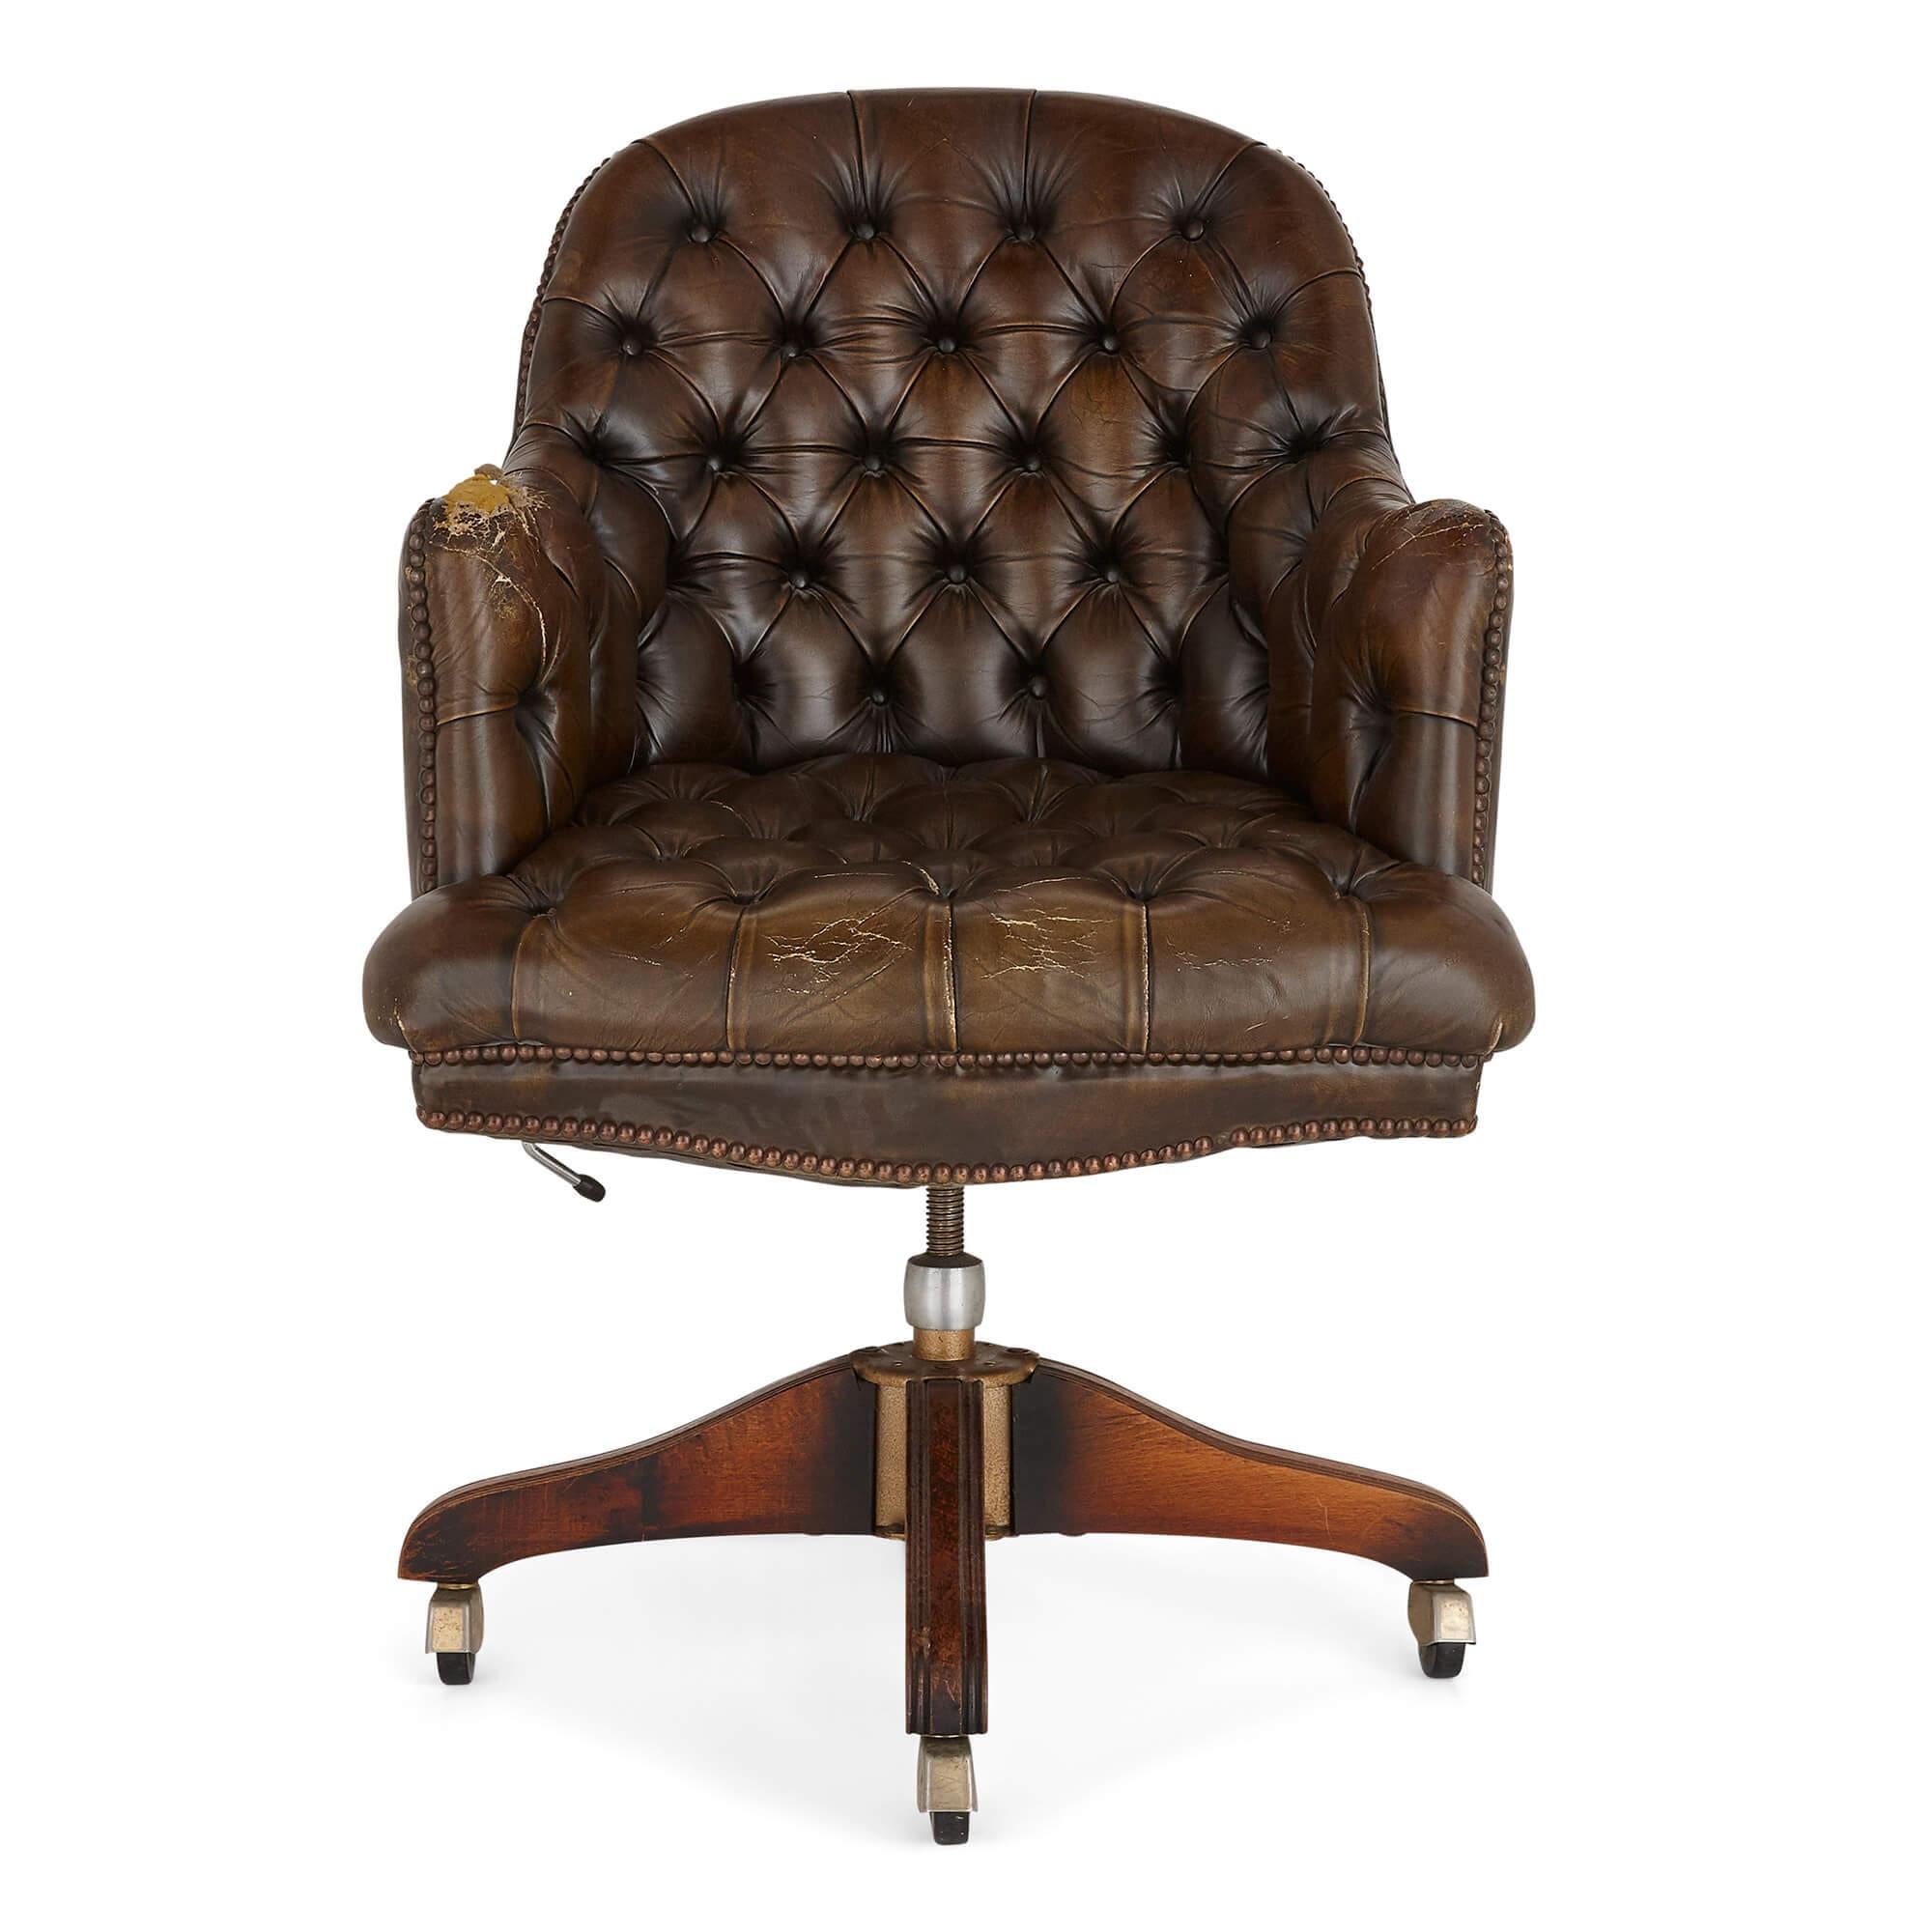 English leather desk chair in the Georgian style
English, 20th century
Measures: Height 138cm, width 45cm, depth 40cm

This fine desk chair is crafted in the Georgian style. The chair features a leather seat and one-piece curved back rest and